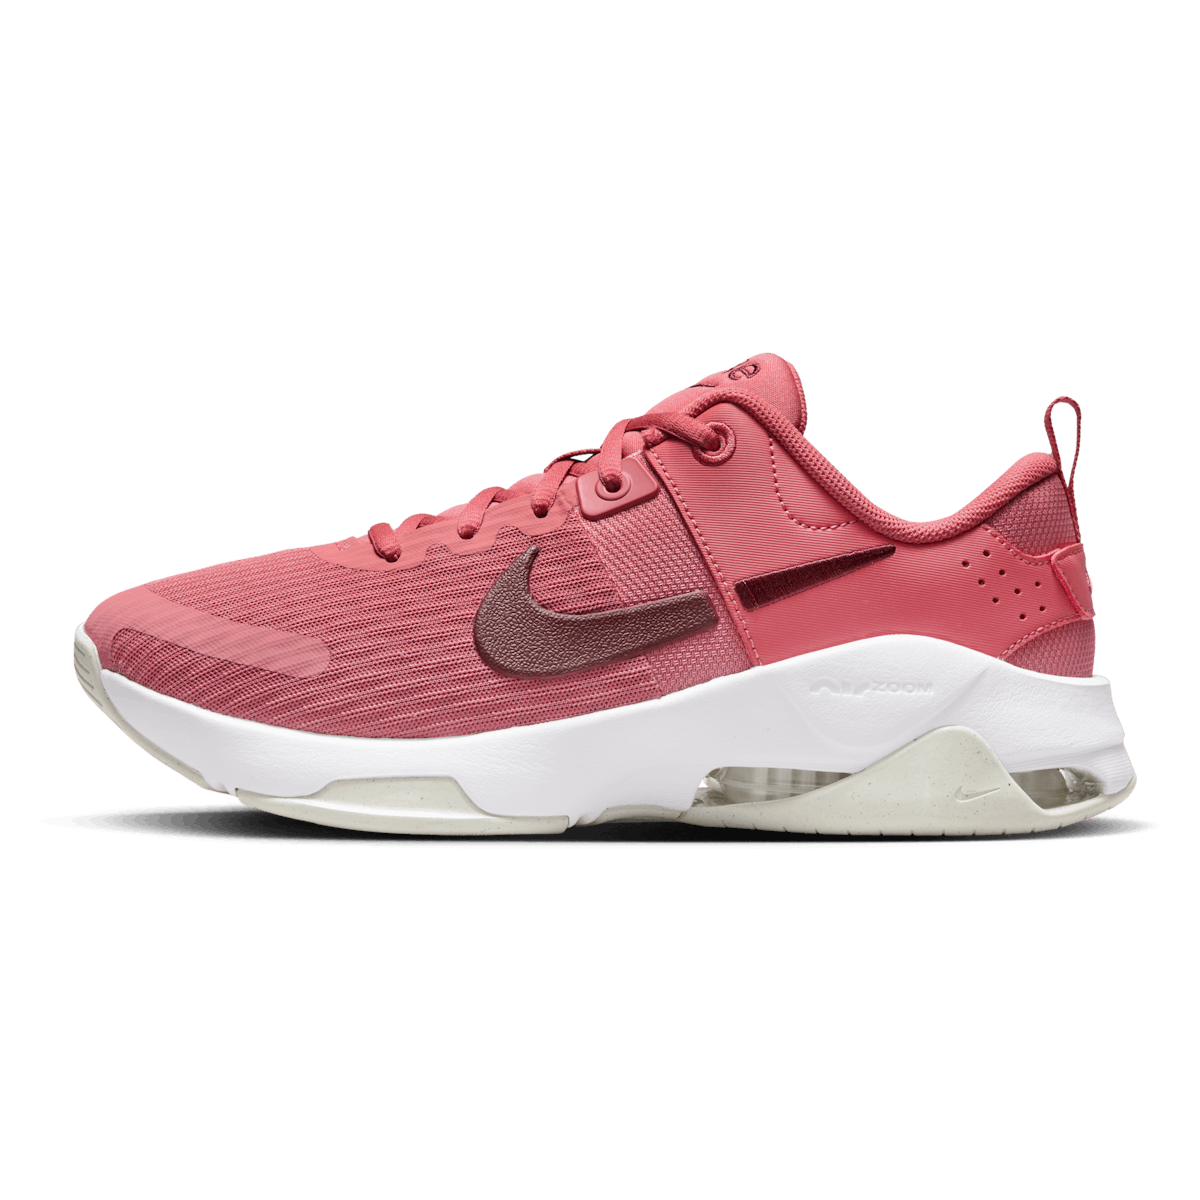 Nike Zoom Bella 6 work-out